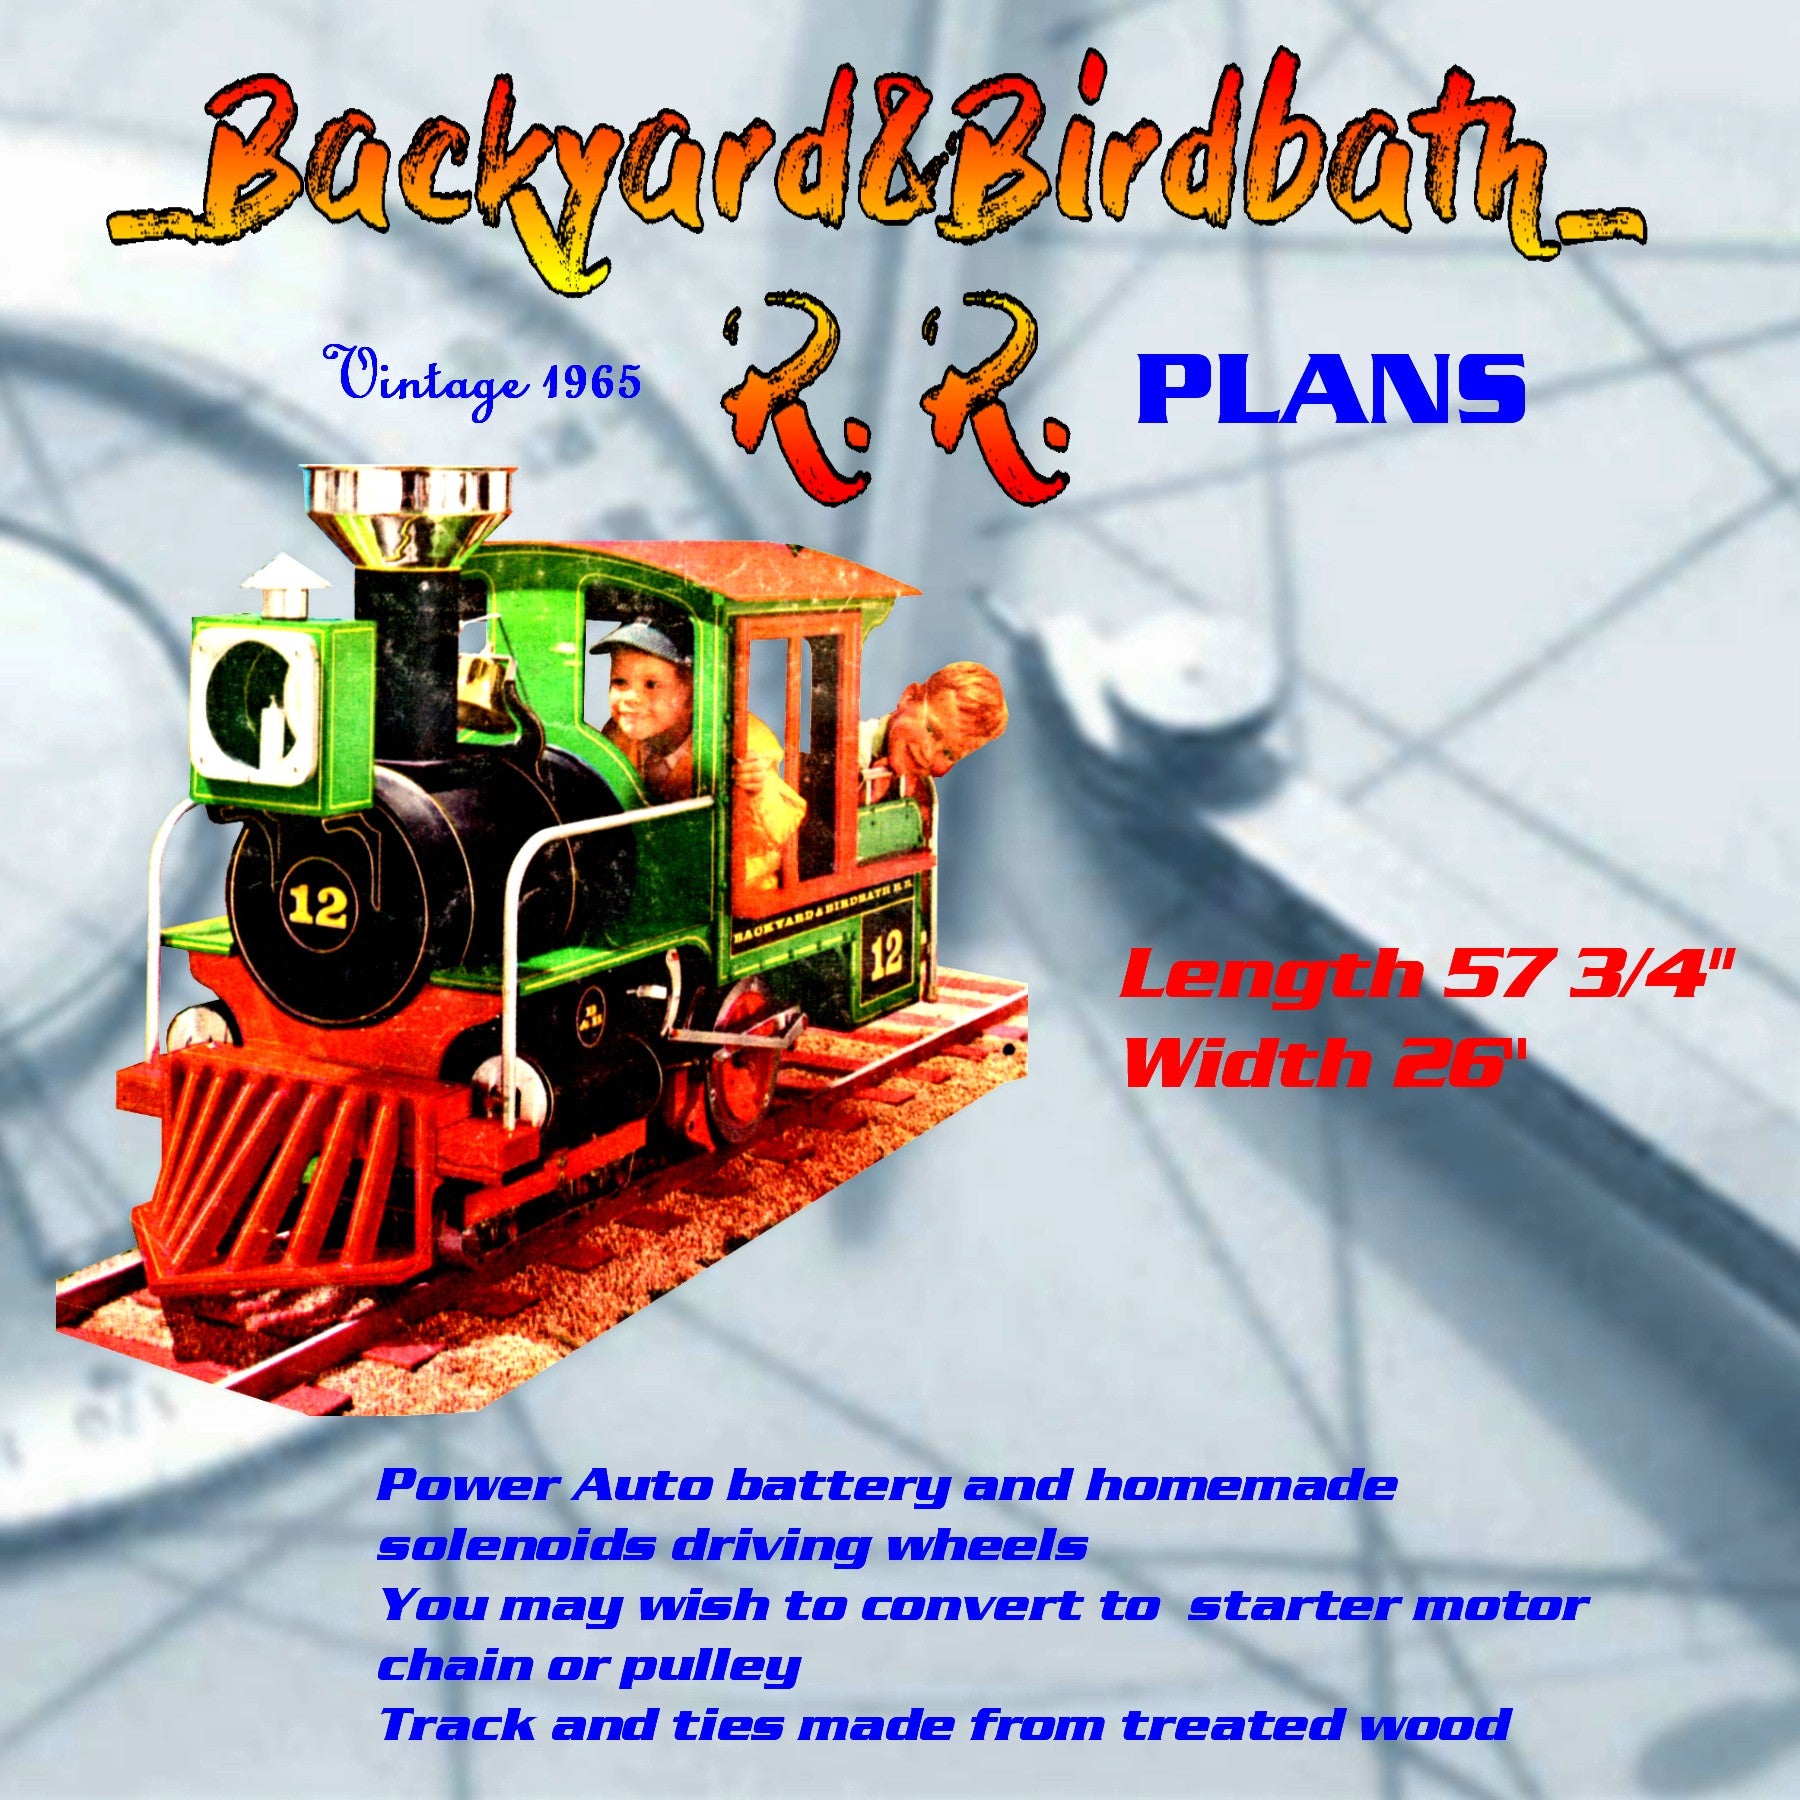 plans to build a childeren's backyard railroad replica old-time steam locomotive and track